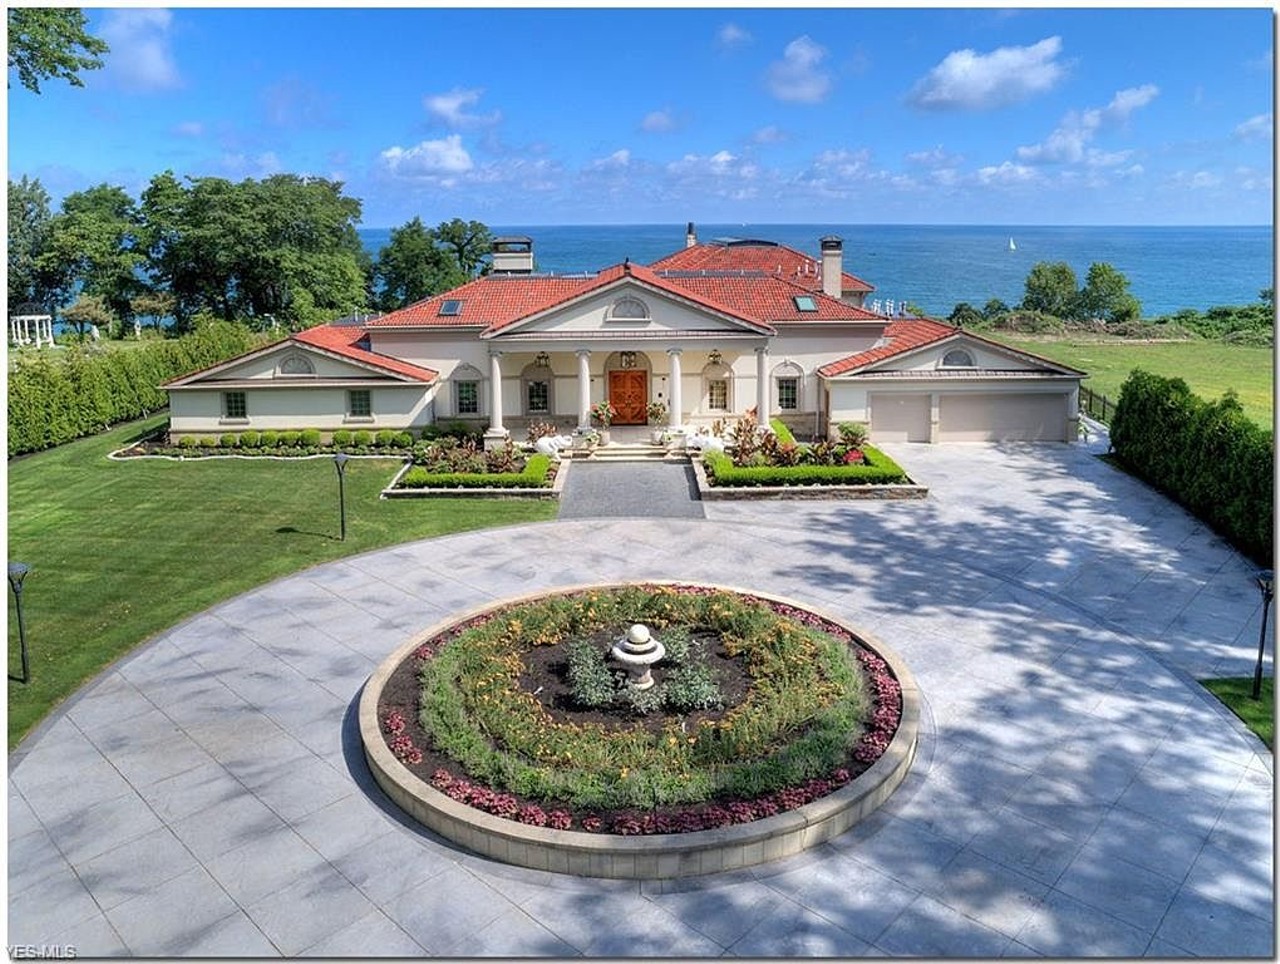  11518 Harbor View Drive, Cleveland 
$6,500,000, 15,000 Square Feet 